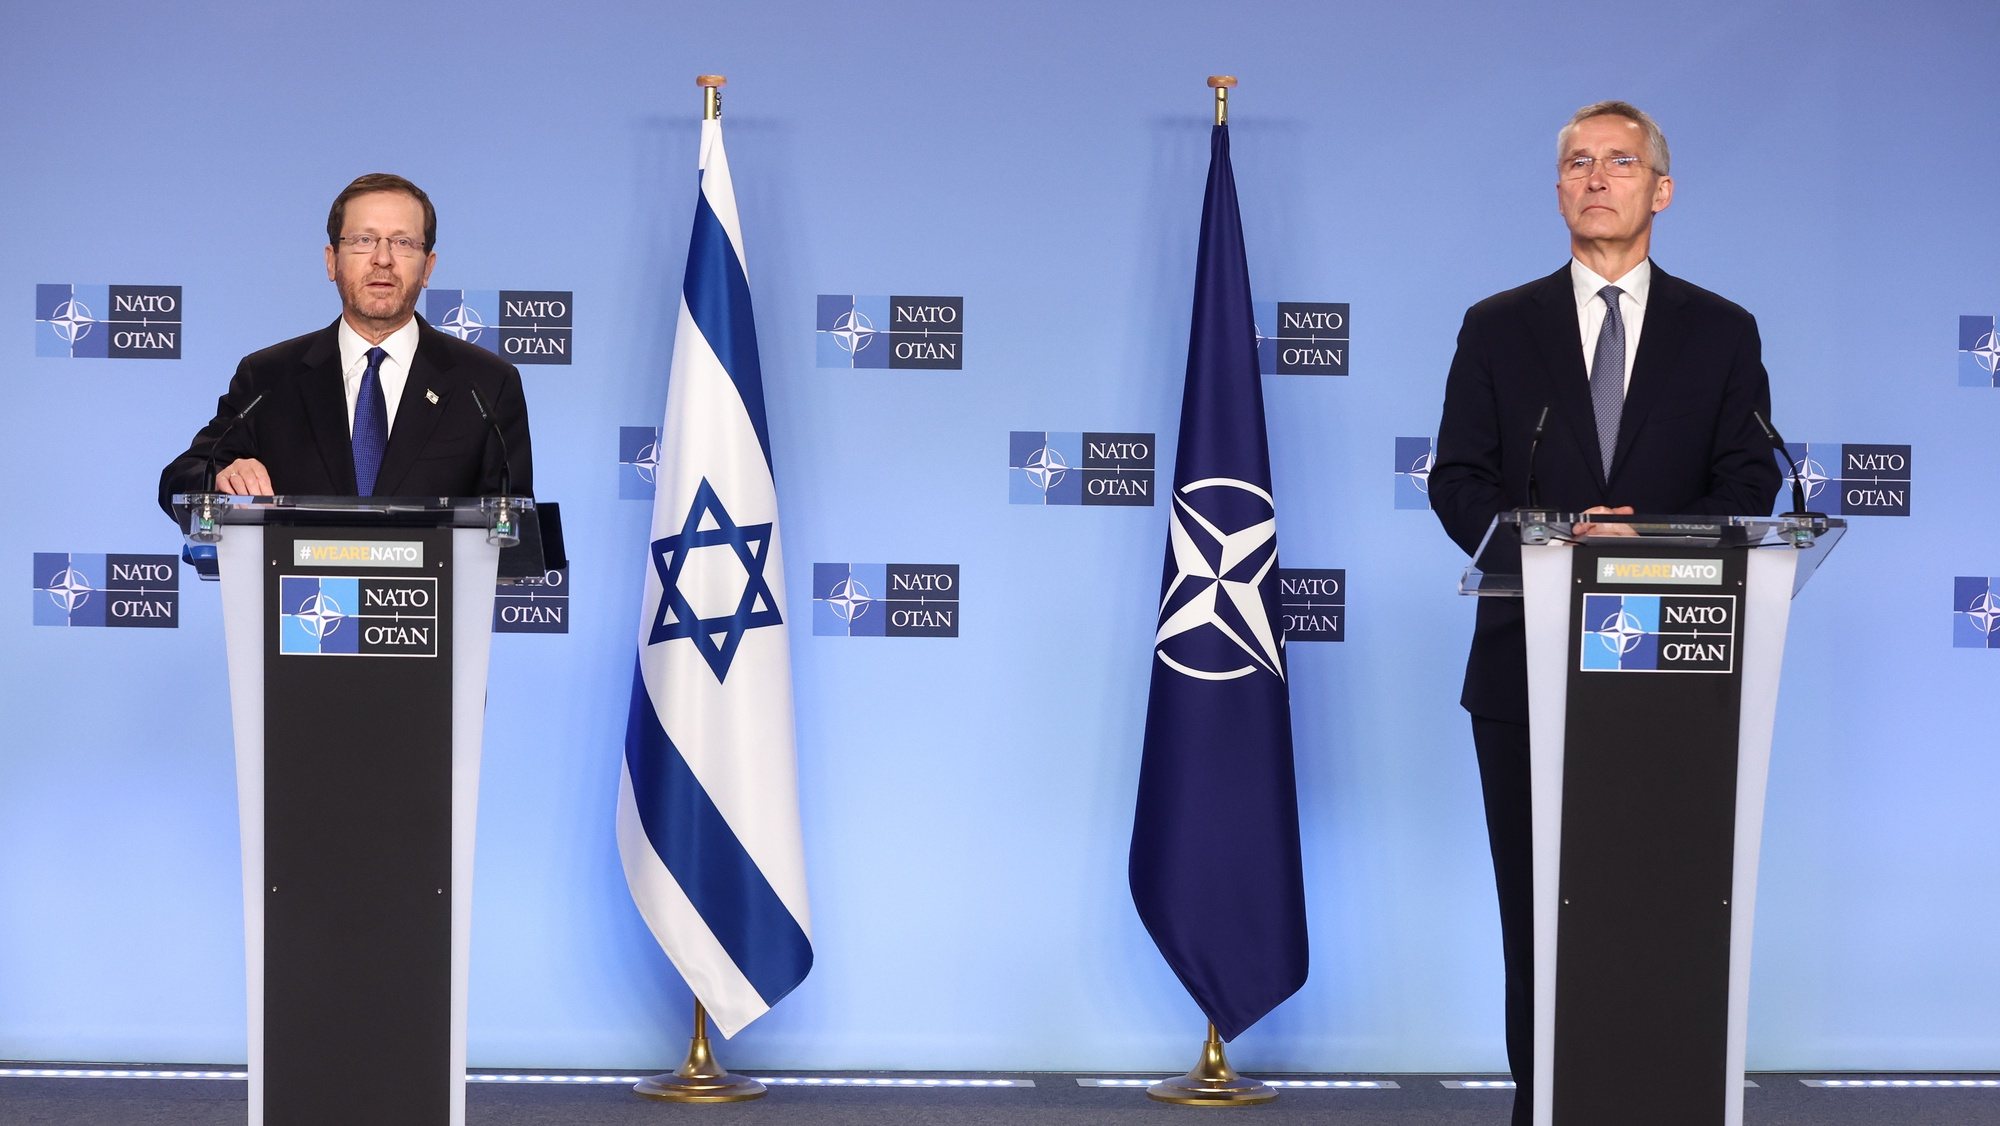 epa10431431 Israel President Isaac Herzog (L) and NATO Secretary General Jens Stoltenberg give statements to the press ahead of a meeting of the North Atlantic Council at NATO headquarters in Brussels, Belgium, 26 January 2023. According to the Israeli Government Press Office, Herzog began on 25 January a two-day official visit in Belgium, where he met with leaders of the European Unionâ€™s institutions, the Belgian government and NATO Secretary-General Jens Stoltenberg and representatives of NATO member-states.  EPA/STEPHANIE LECOCQ